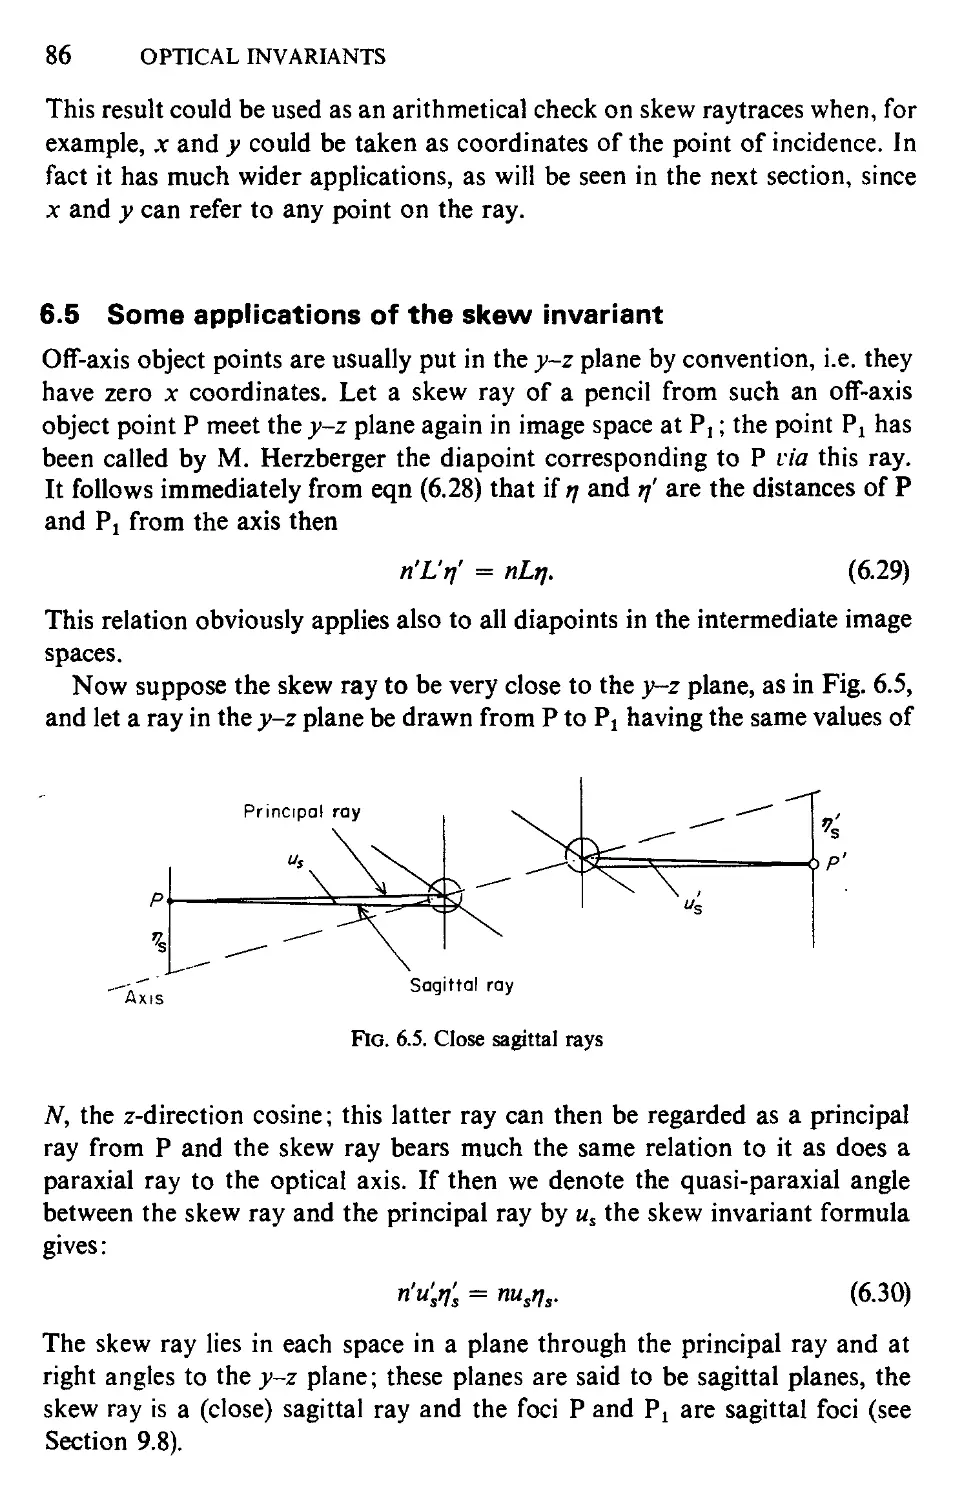 6.5 Some applications of the skew invariant